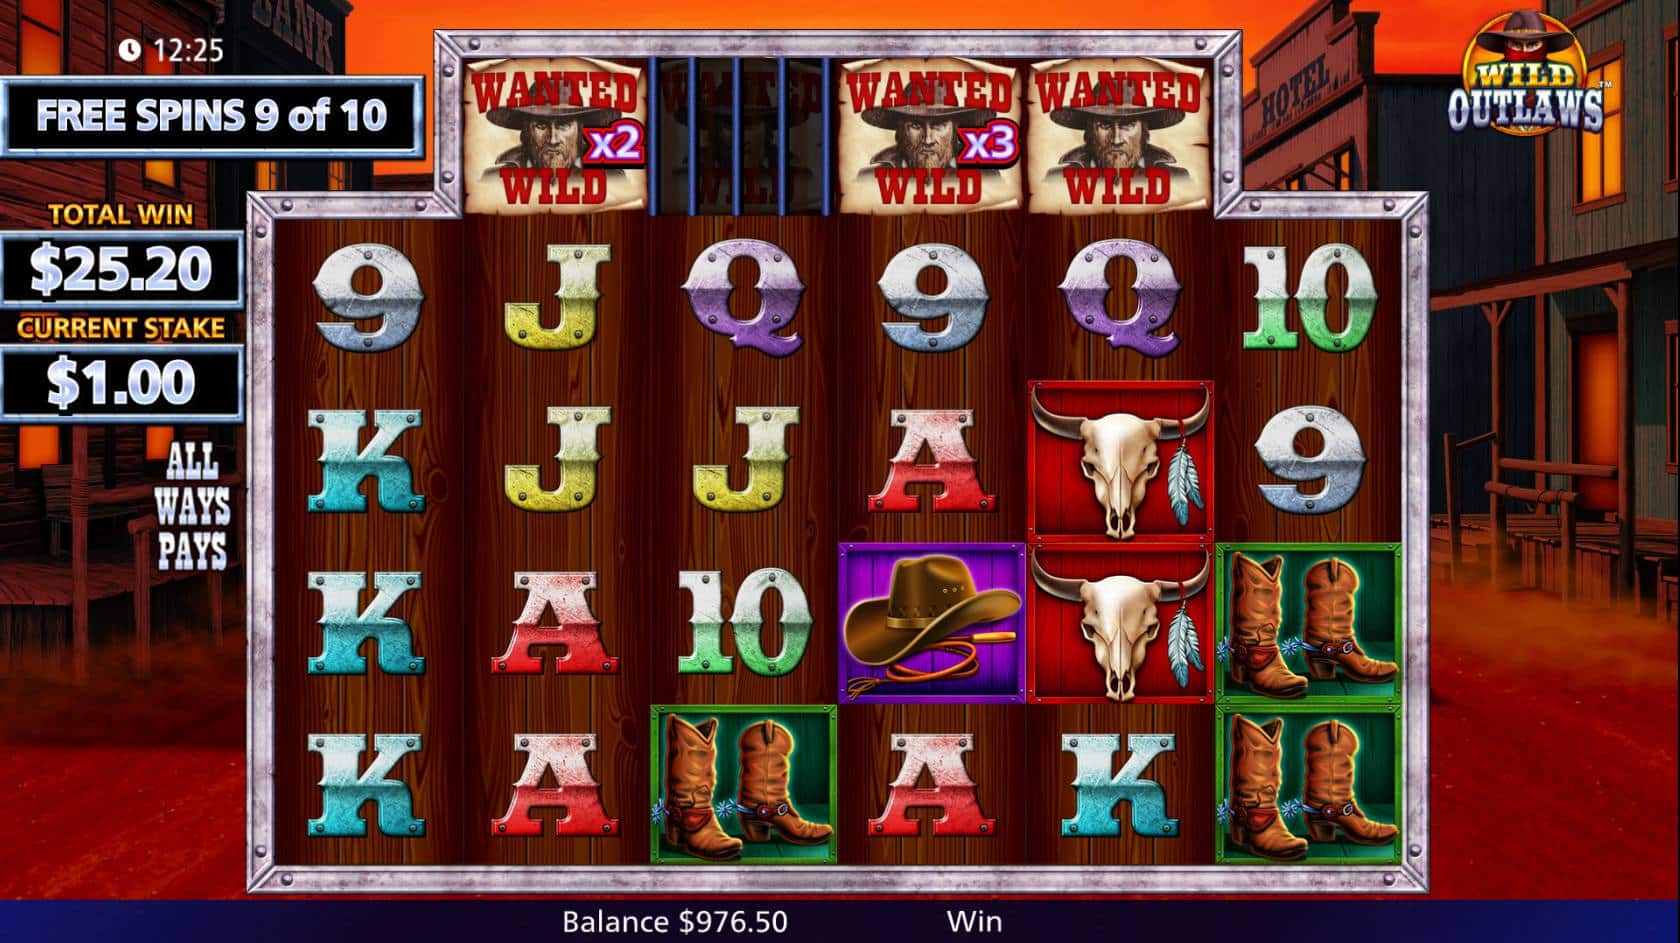 Wild Outlaws Free Spins